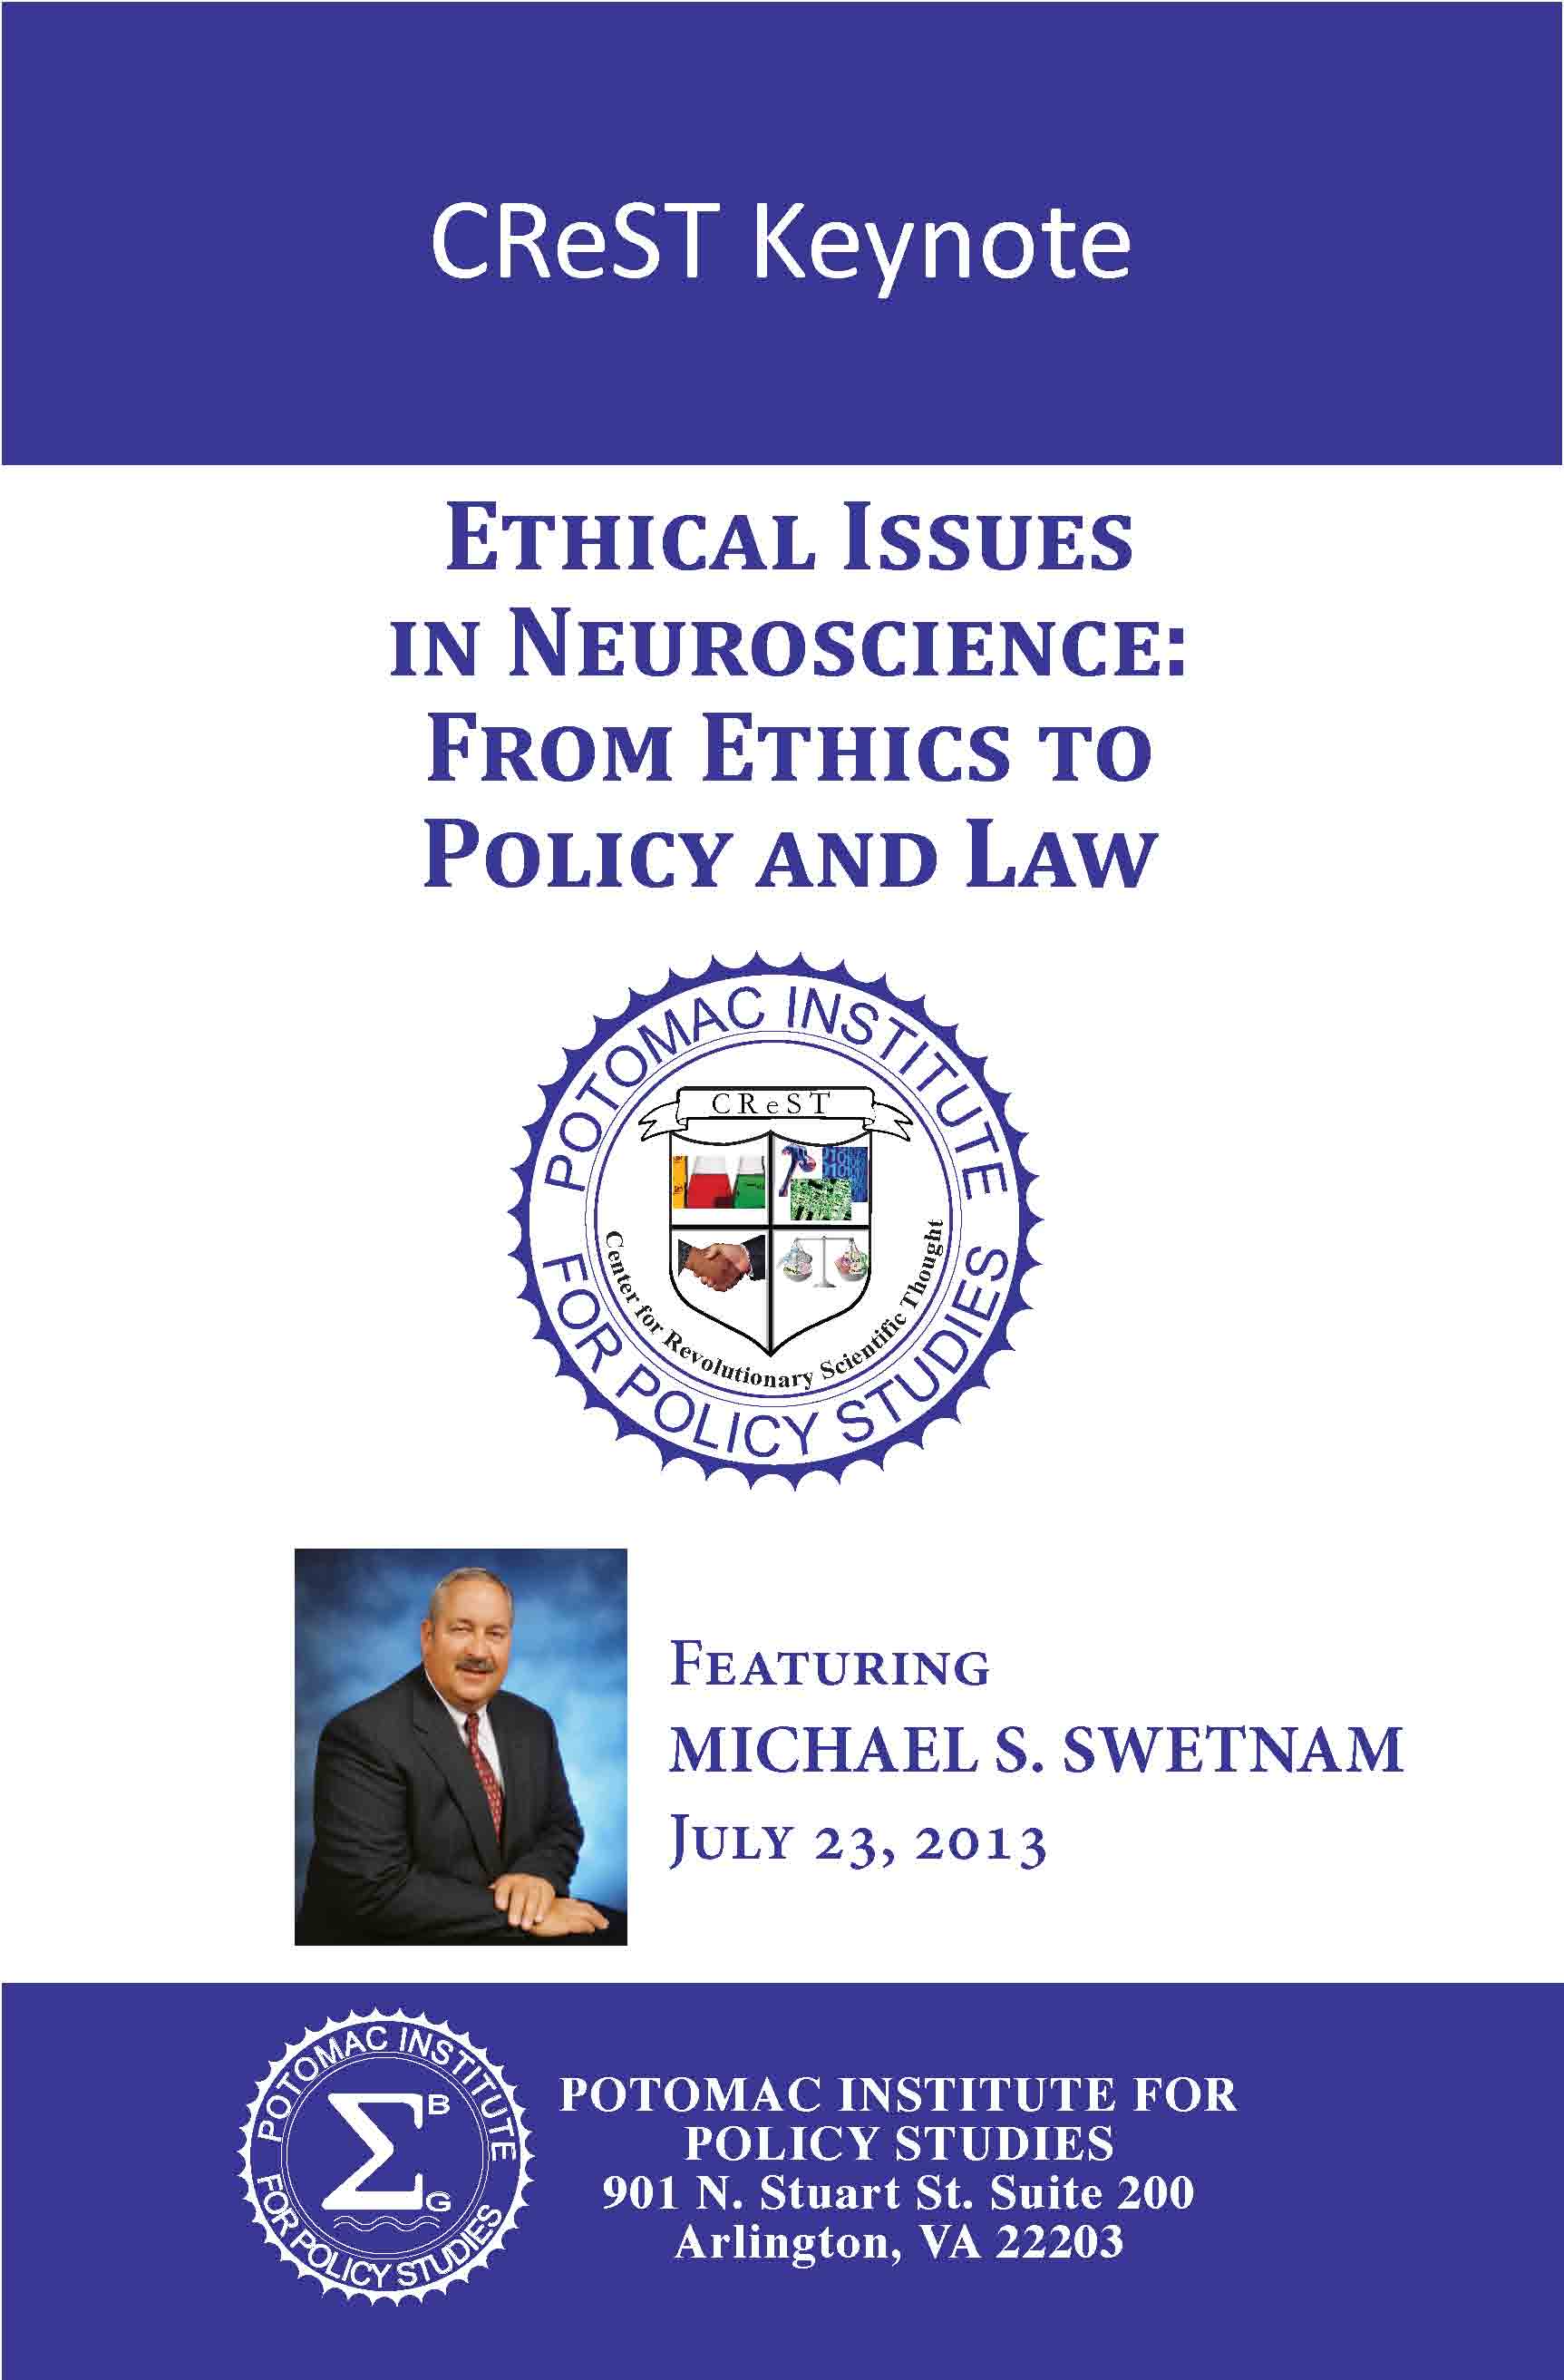 CreST Keynote - Ethical Issues in Neuroscience: From Policy to Science and Law